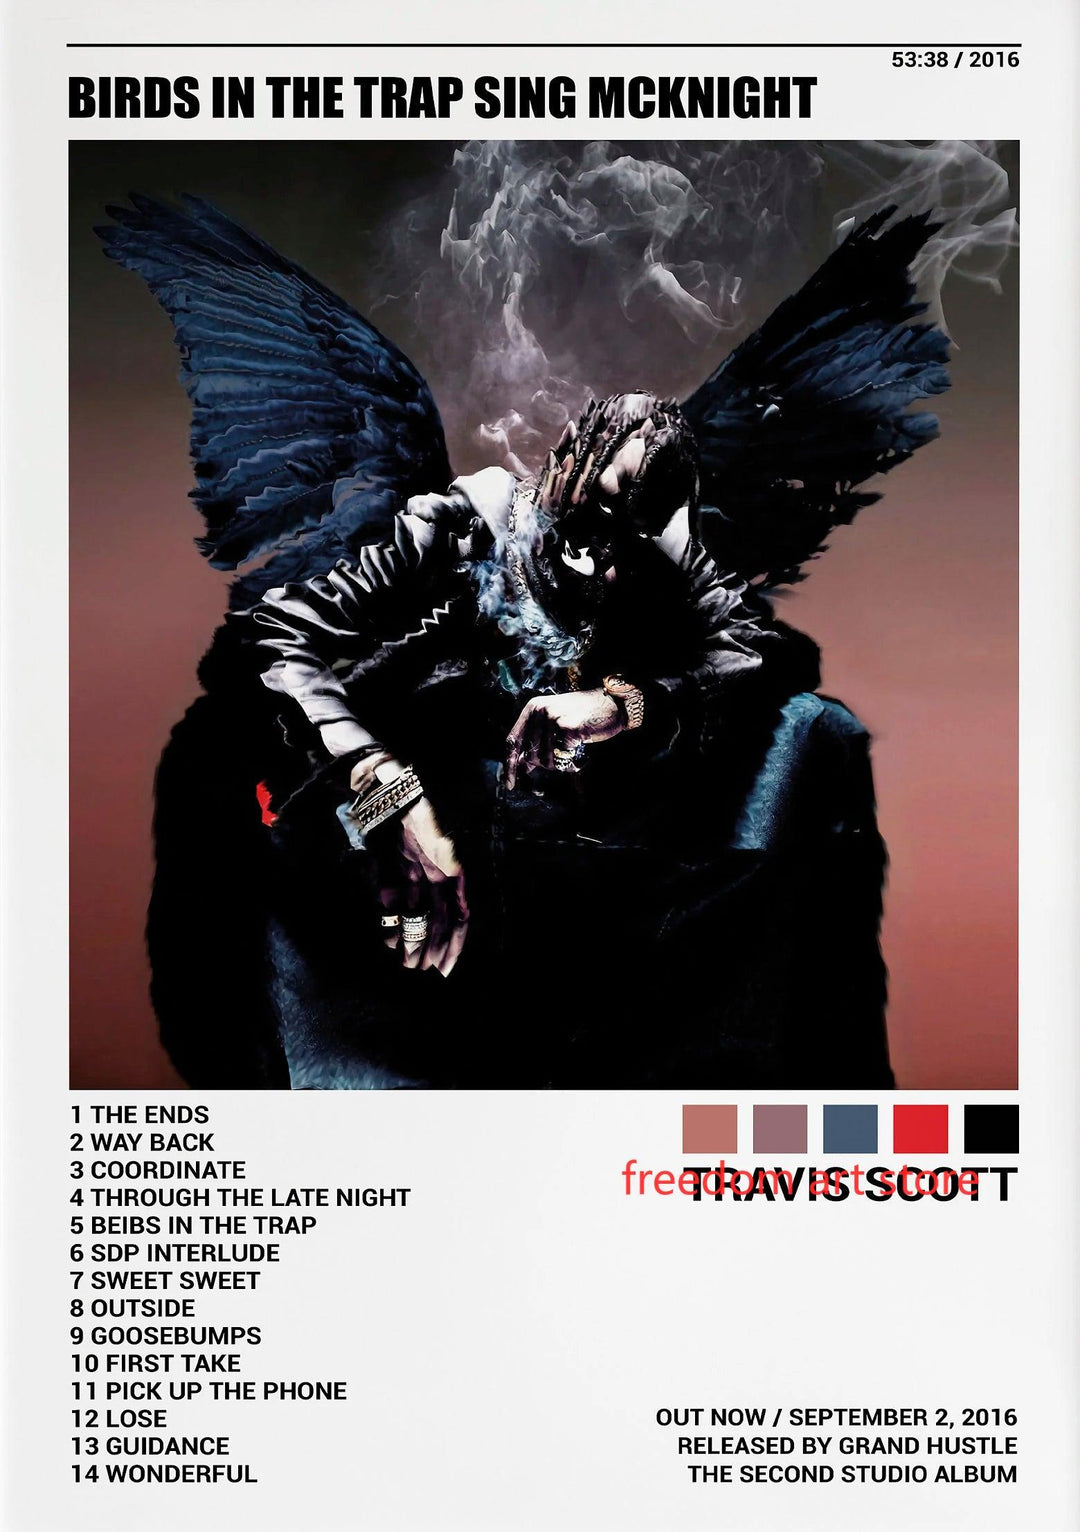 Travis Scott Astroworld & Utopia Wall Art: Exclusive Music Album Cover Posters for Modern Home Decor - Brand My Case